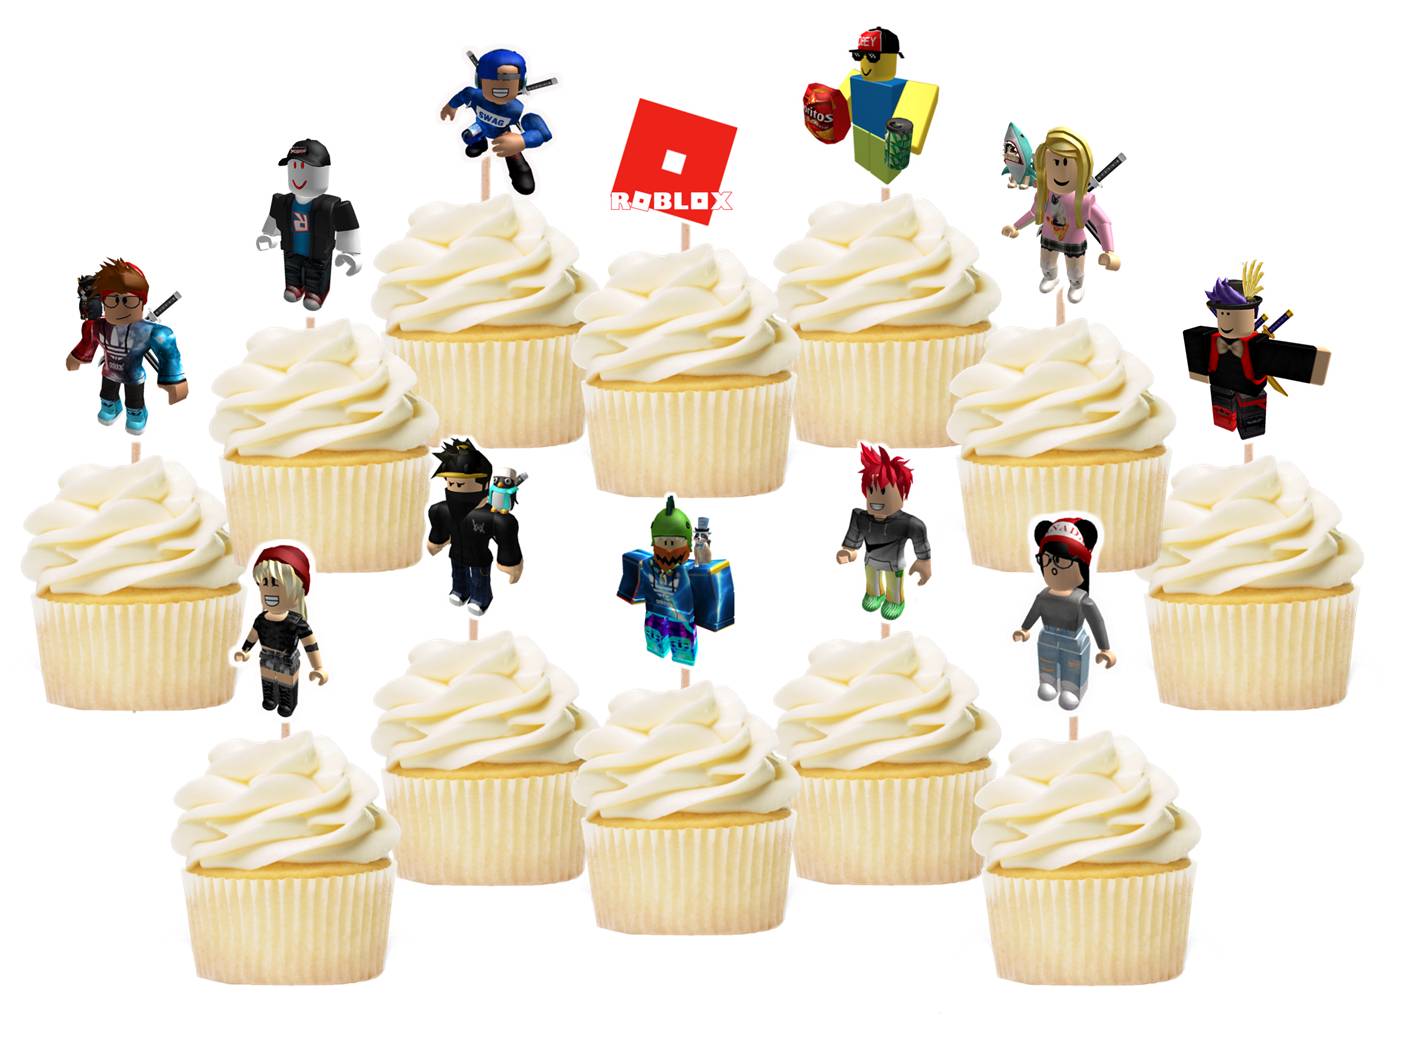 Roblox Cupcake Toppers / Roblox Food Picks / Roblox Party 